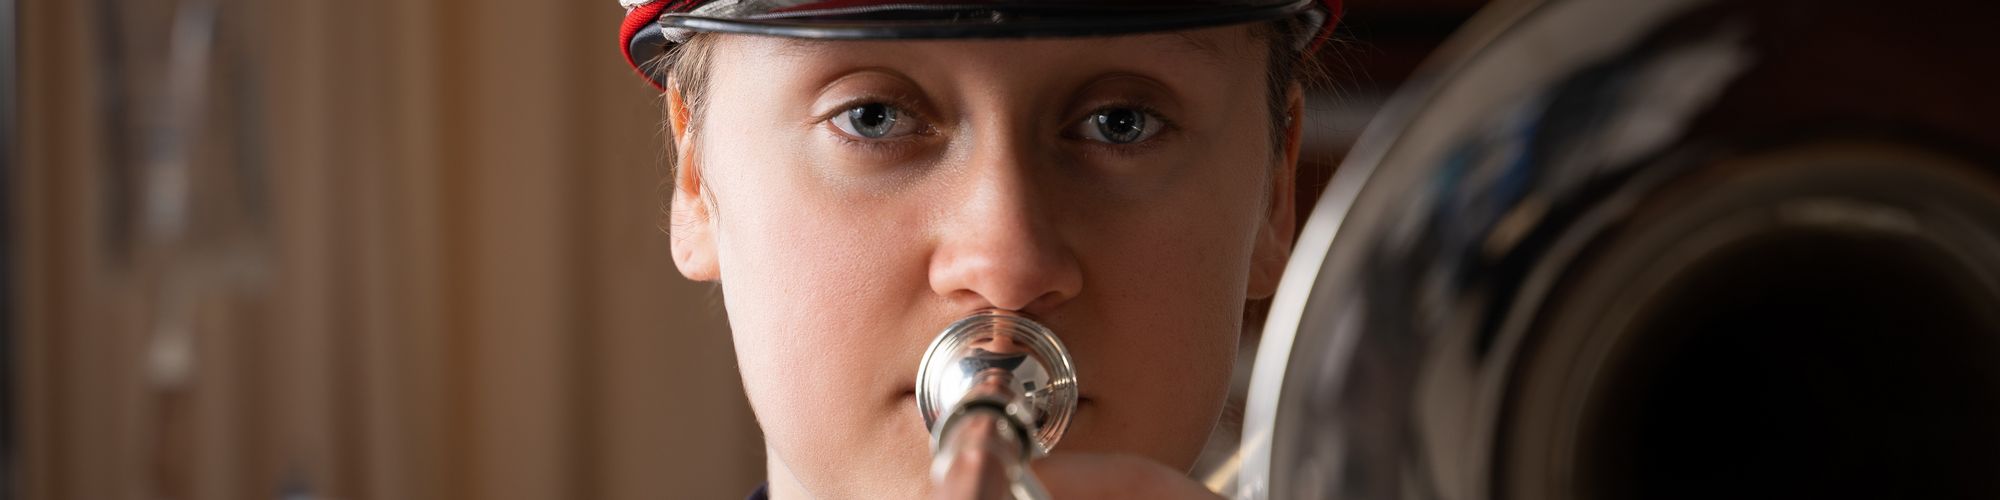 nursing student with trombone in marching band attire